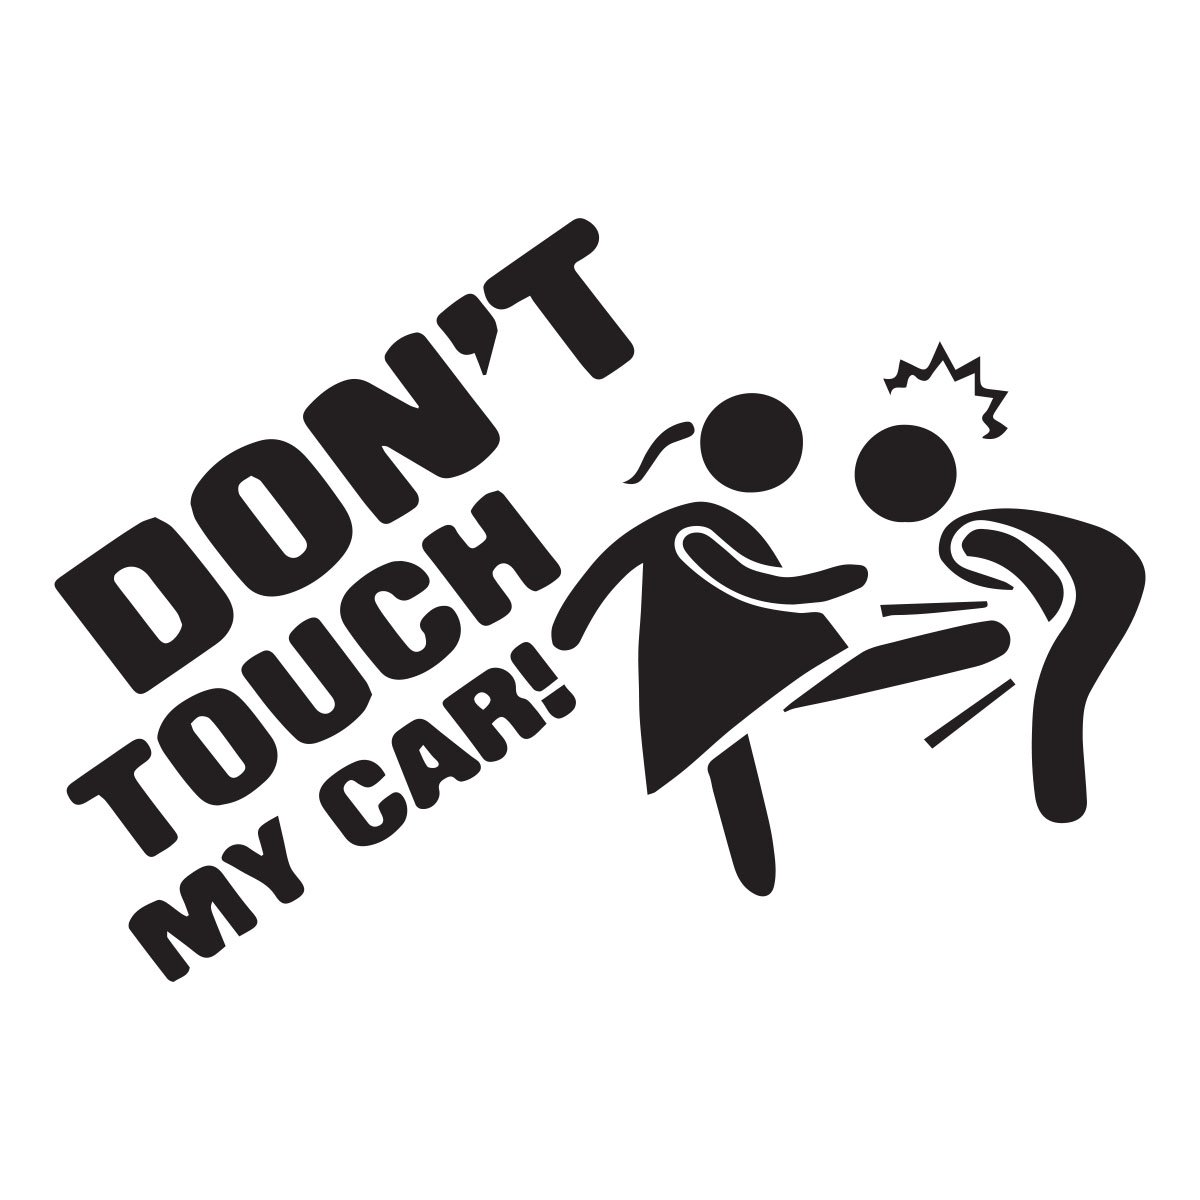 dont touch my car2